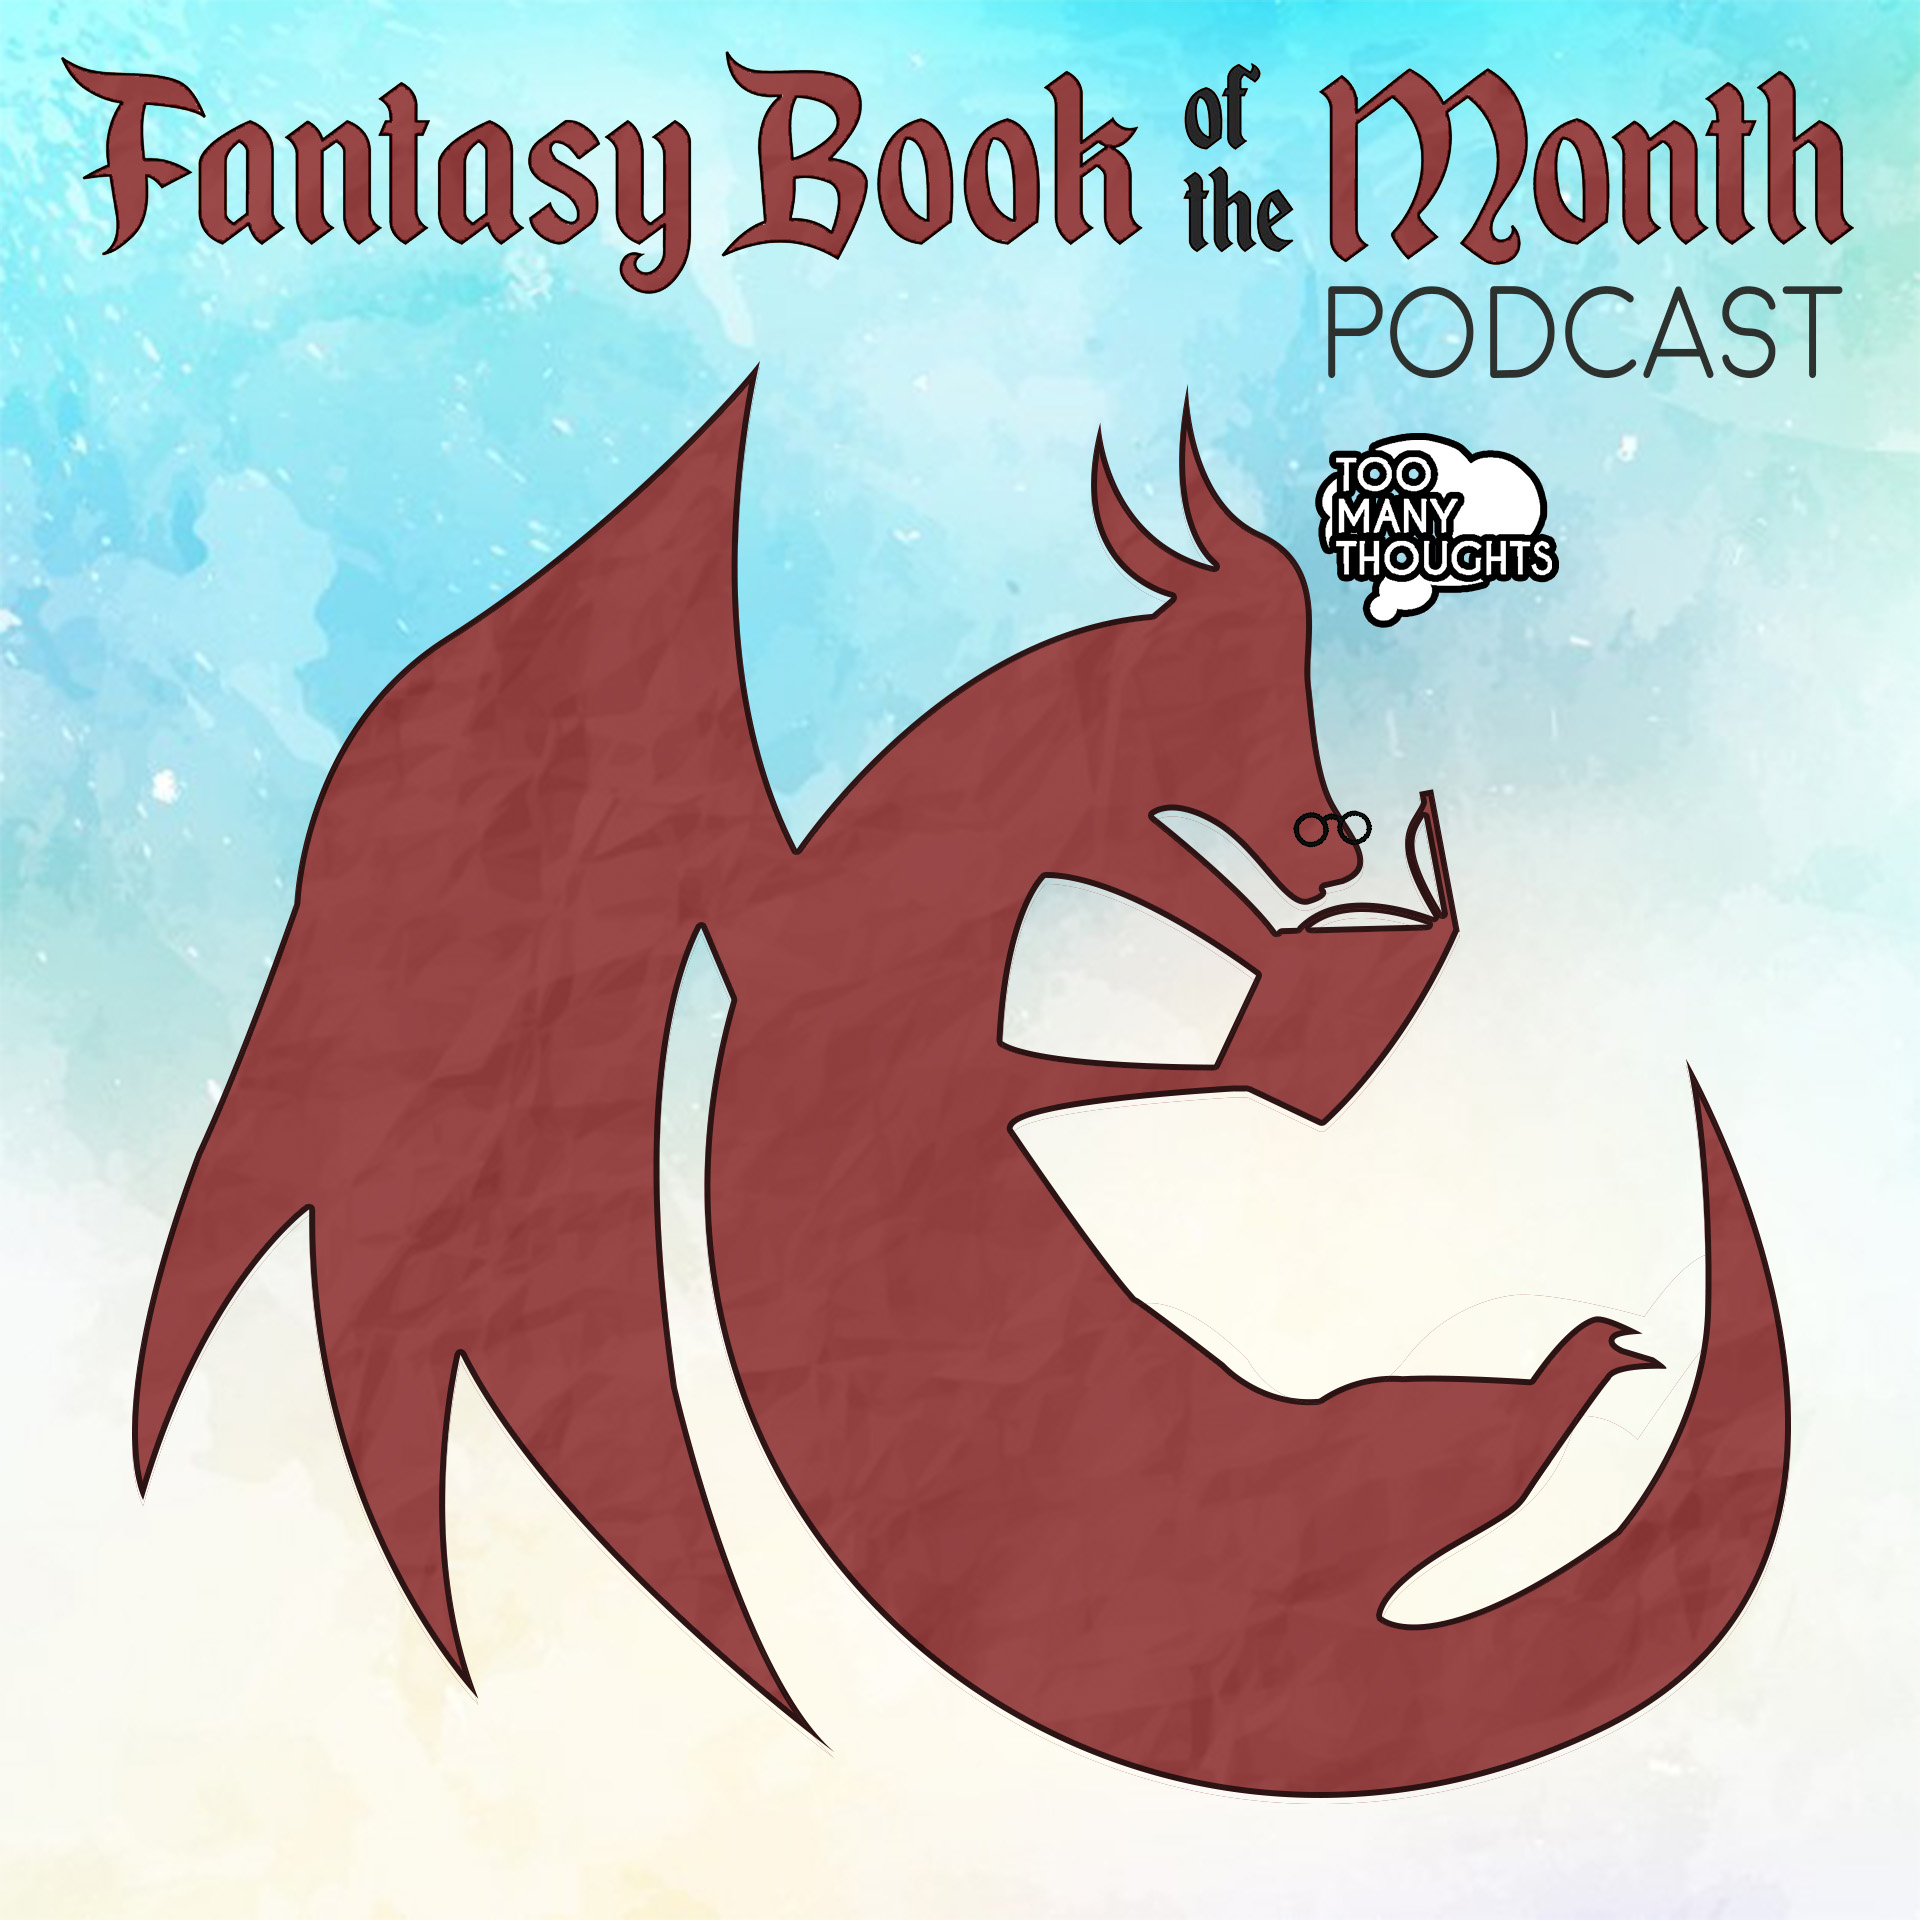 Fantasy Book of the Month Podcast artwork